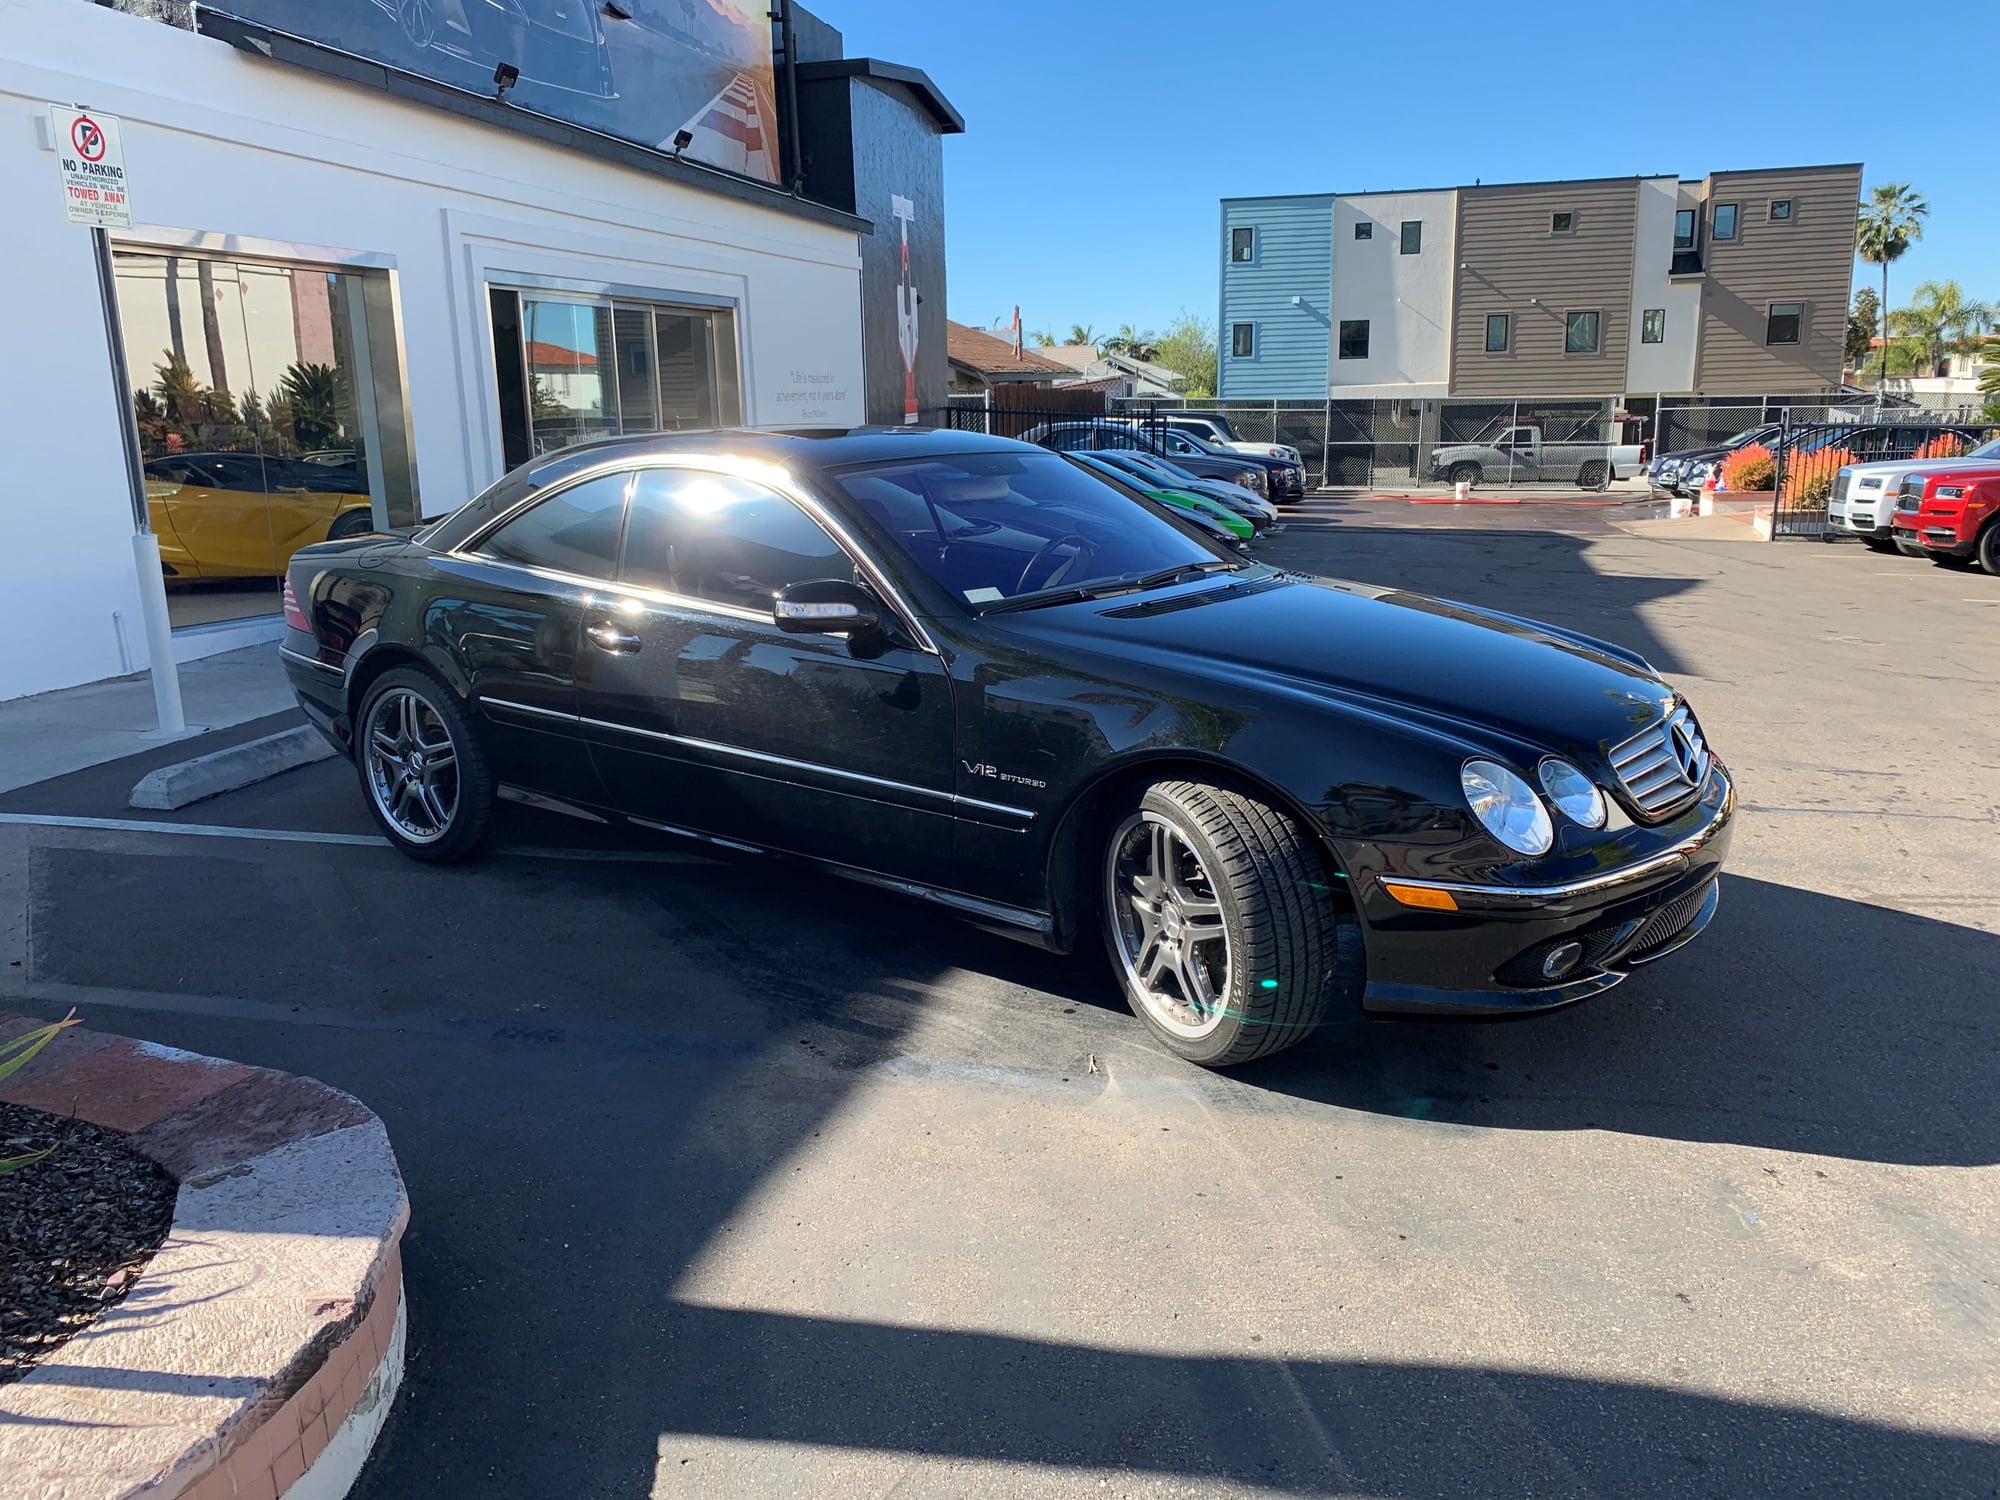 2005 Mercedes-Benz CL65 AMG - 2005 CL65 AMG- 17,000 miles- 1 owner - Used - VIN WDBPJ79JX5A044555 - 17,000 Miles - 12 cyl - 2WD - Automatic - Coupe - Black - San Diego, CA 92037, United States